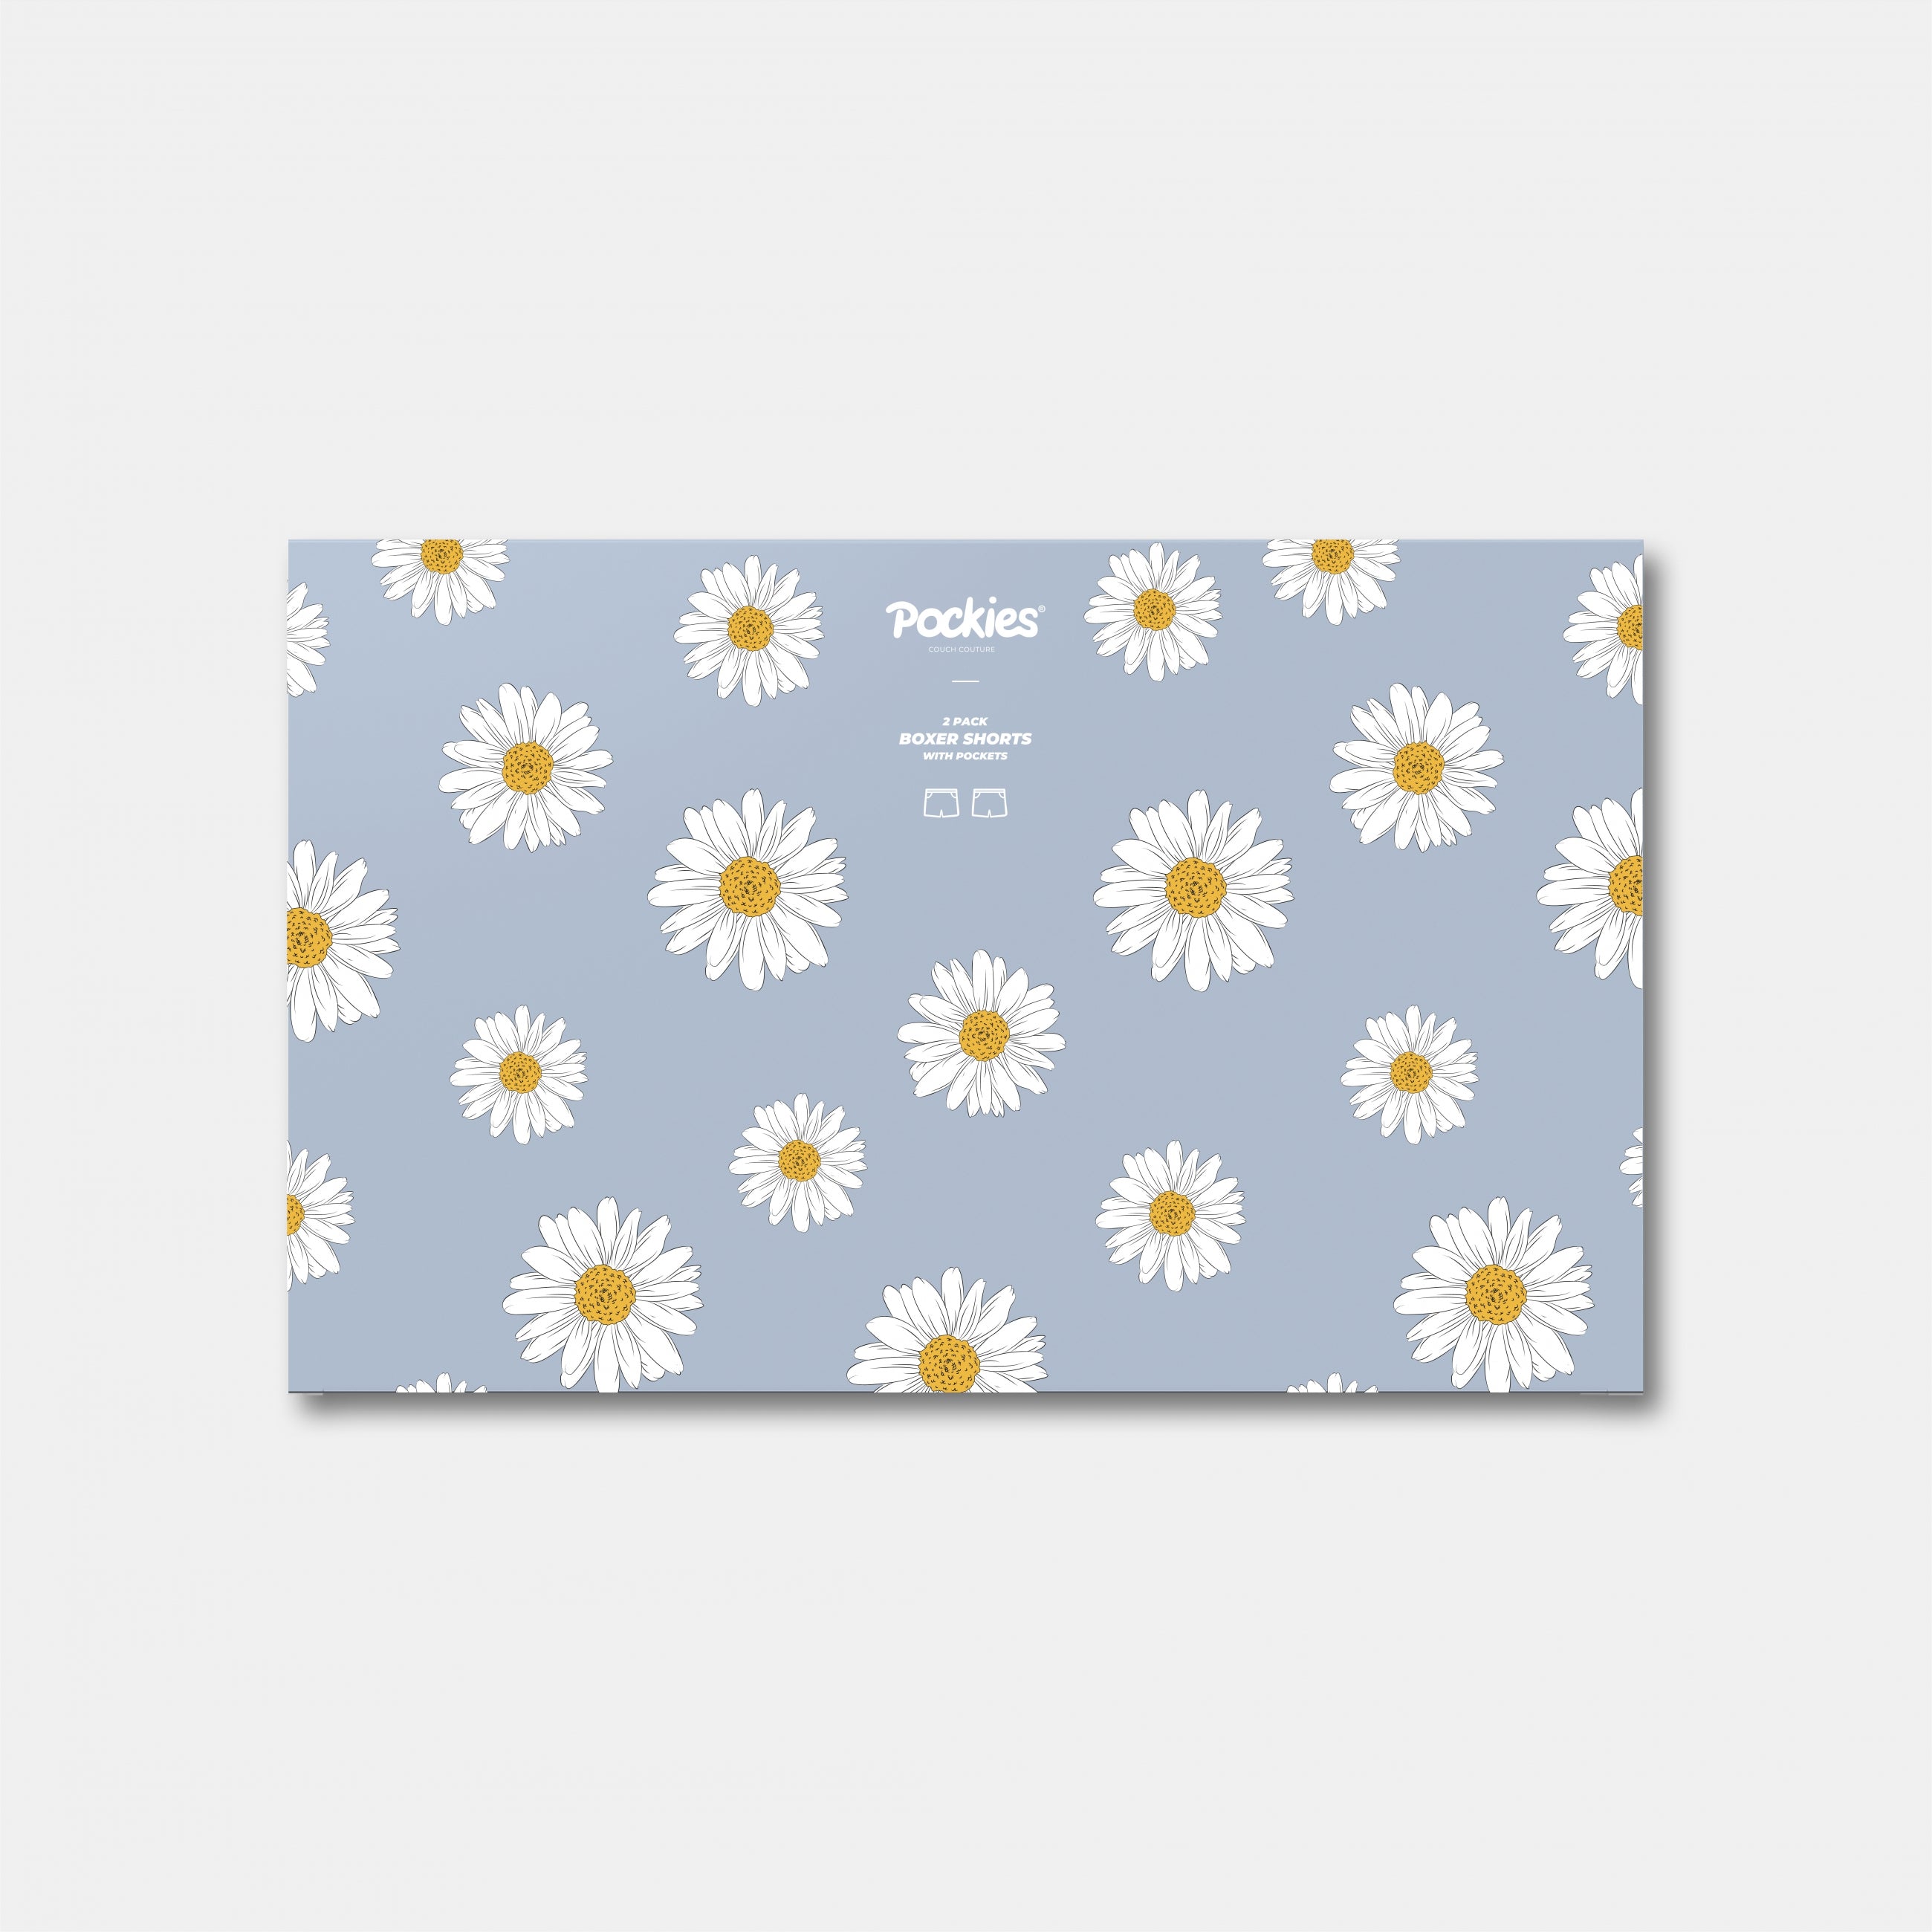 2-Pack - Flowers Boxers